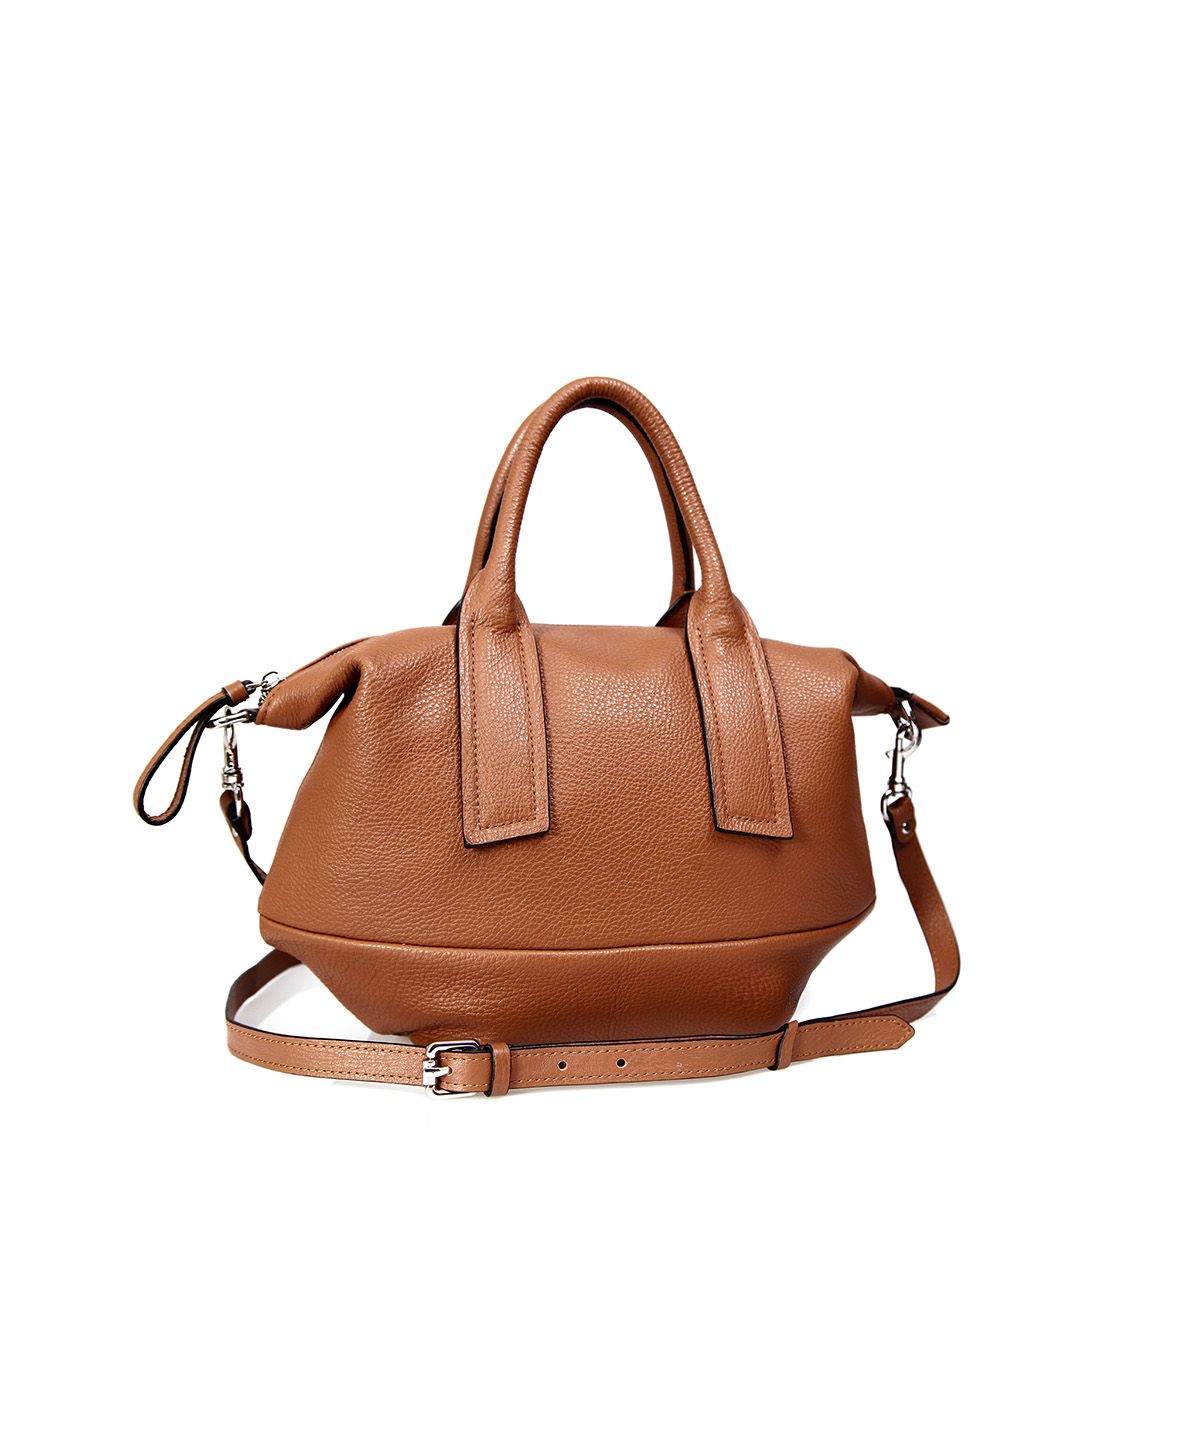  ELMO CROSSBODY - IN NATURAL MILLED LEATHER - BROWN- FQ16-20 